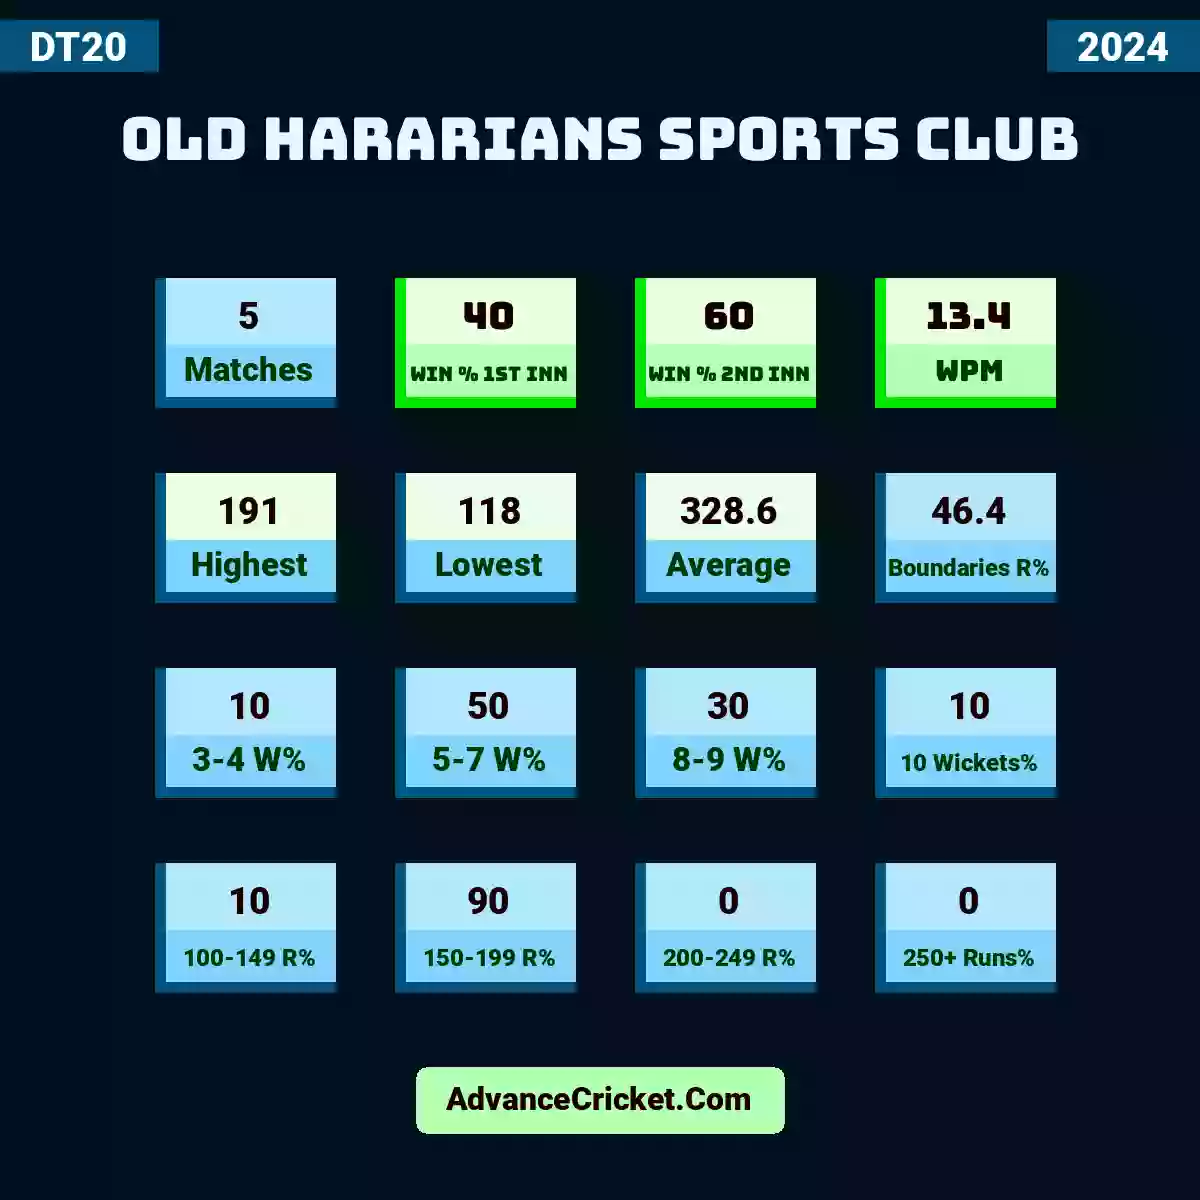 Image showing Old Hararians Sports Club with Matches: 5, Win % 1st Inn: 40, Win % 2nd Inn: 60, WPM: 13.4, Highest: 191, Lowest: 118, Average: 328.6, Boundaries R%: 46.4, 3-4 W%: 10, 5-7 W%: 50, 8-9 W%: 30, 10 Wickets%: 10, 100-149 R%: 10, 150-199 R%: 90, 200-249 R%: 0, 250+ Runs%: 0.